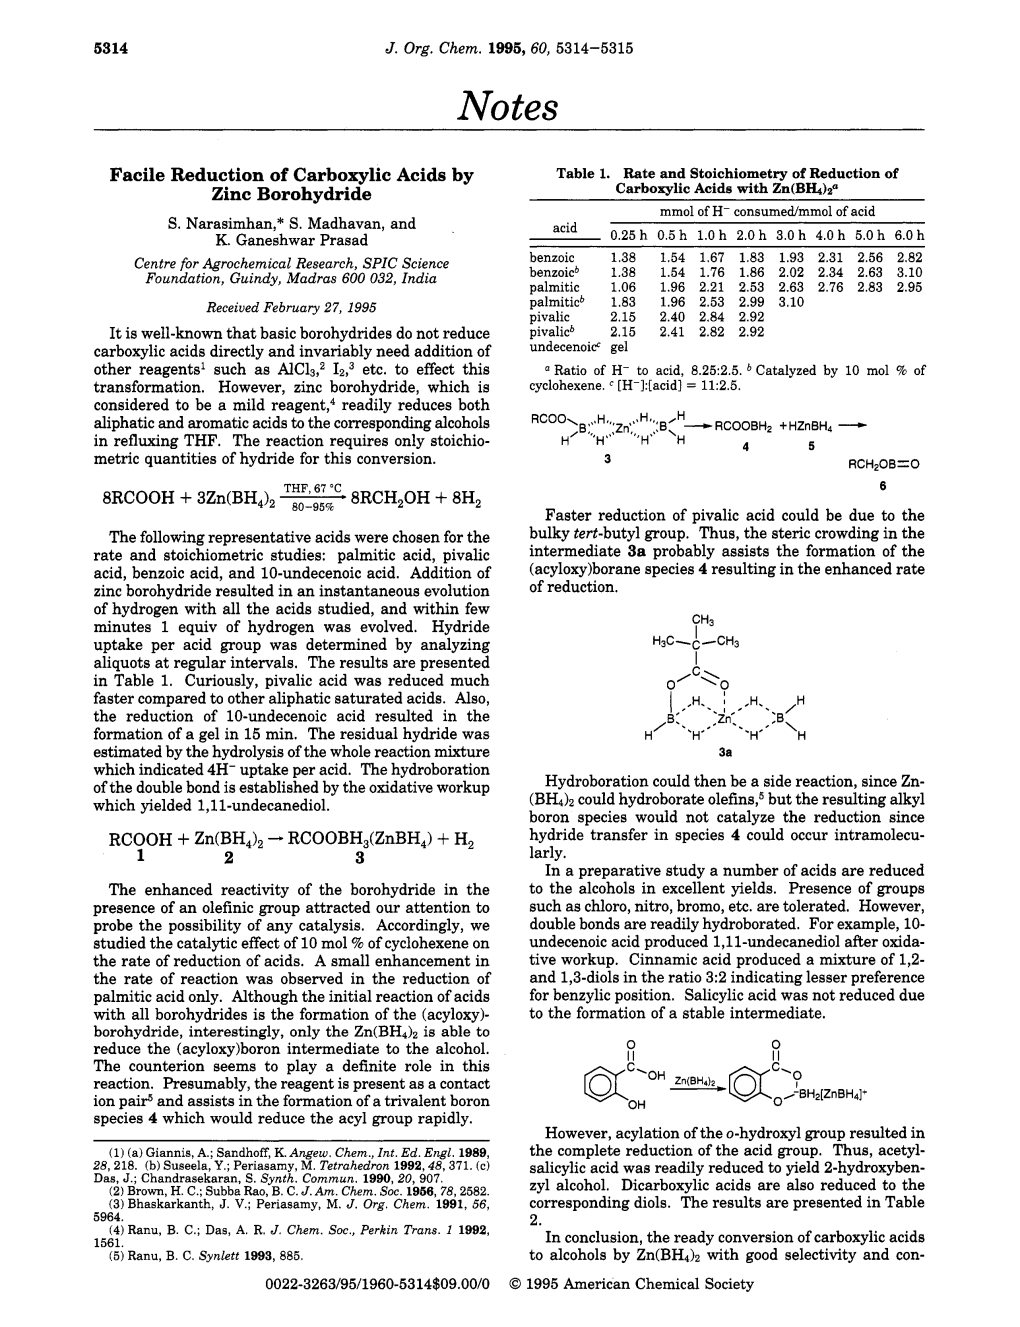 Facile Reduction of Carboxylic Acids by Zinc Borohydride